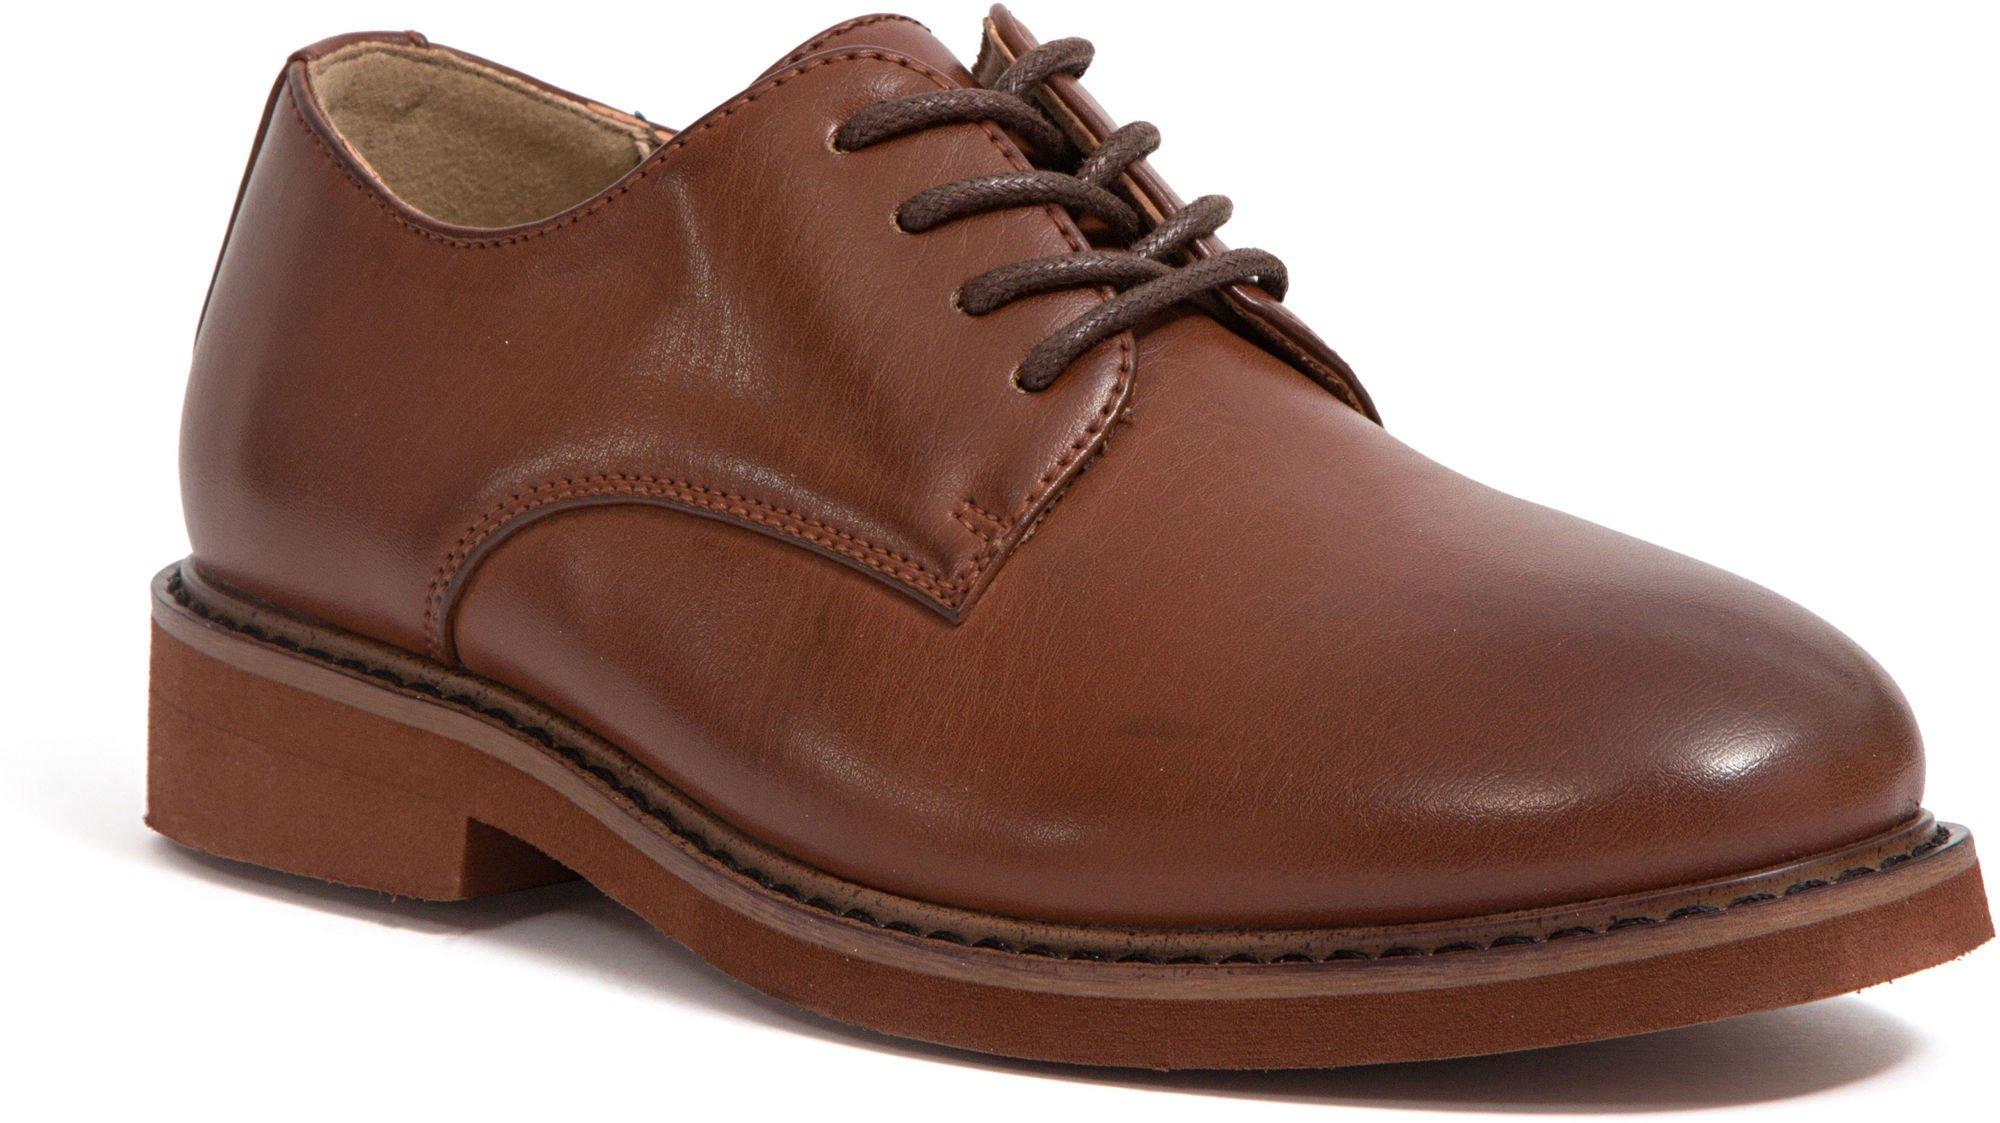 Deer Stags Boys Denny Dress Shoes